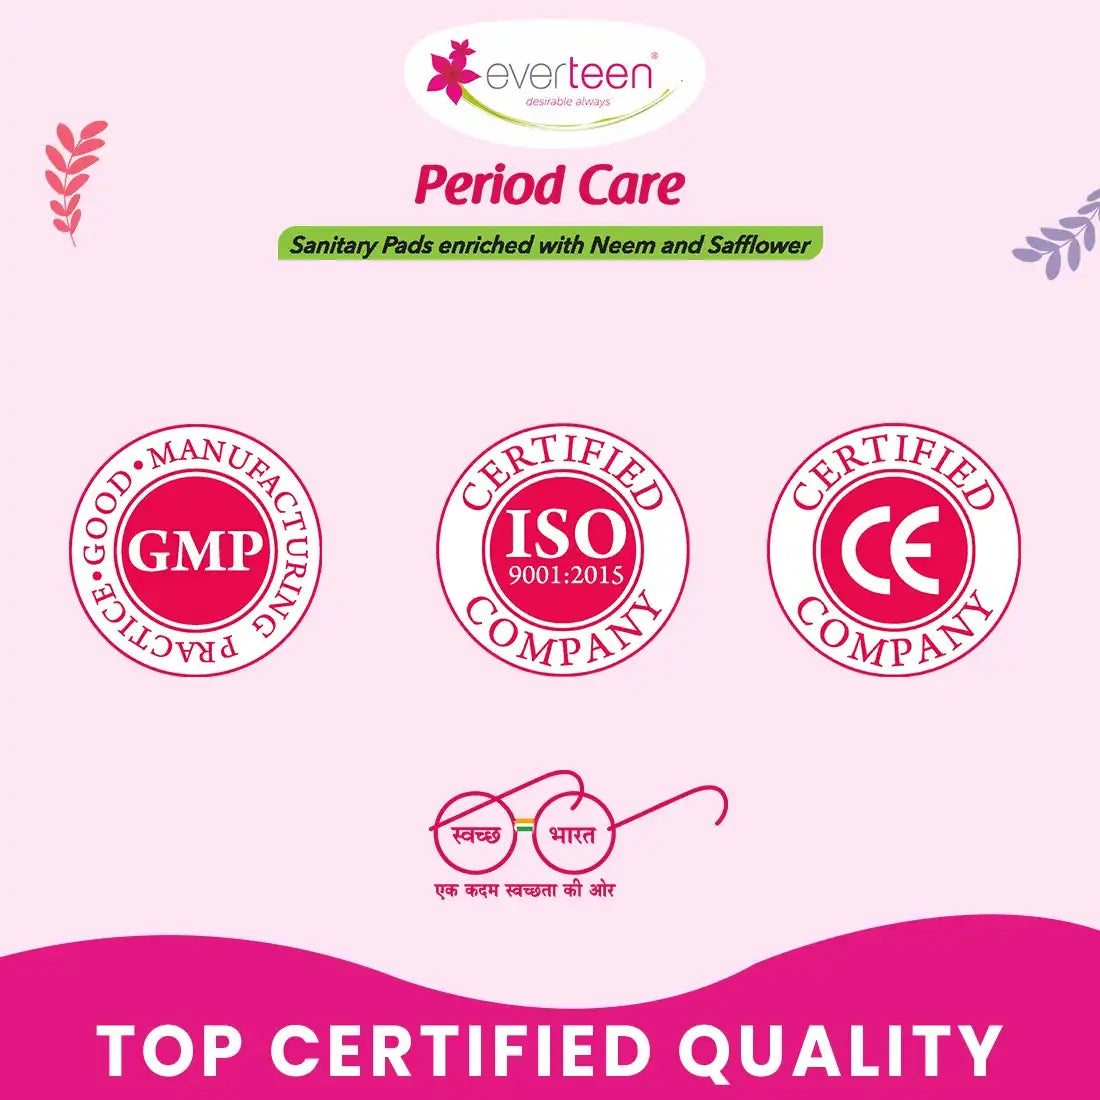 everteen Combo - XXL Period Care 40 Dry and 40 Soft Sanitary Pads Enriched With Neem Safflower